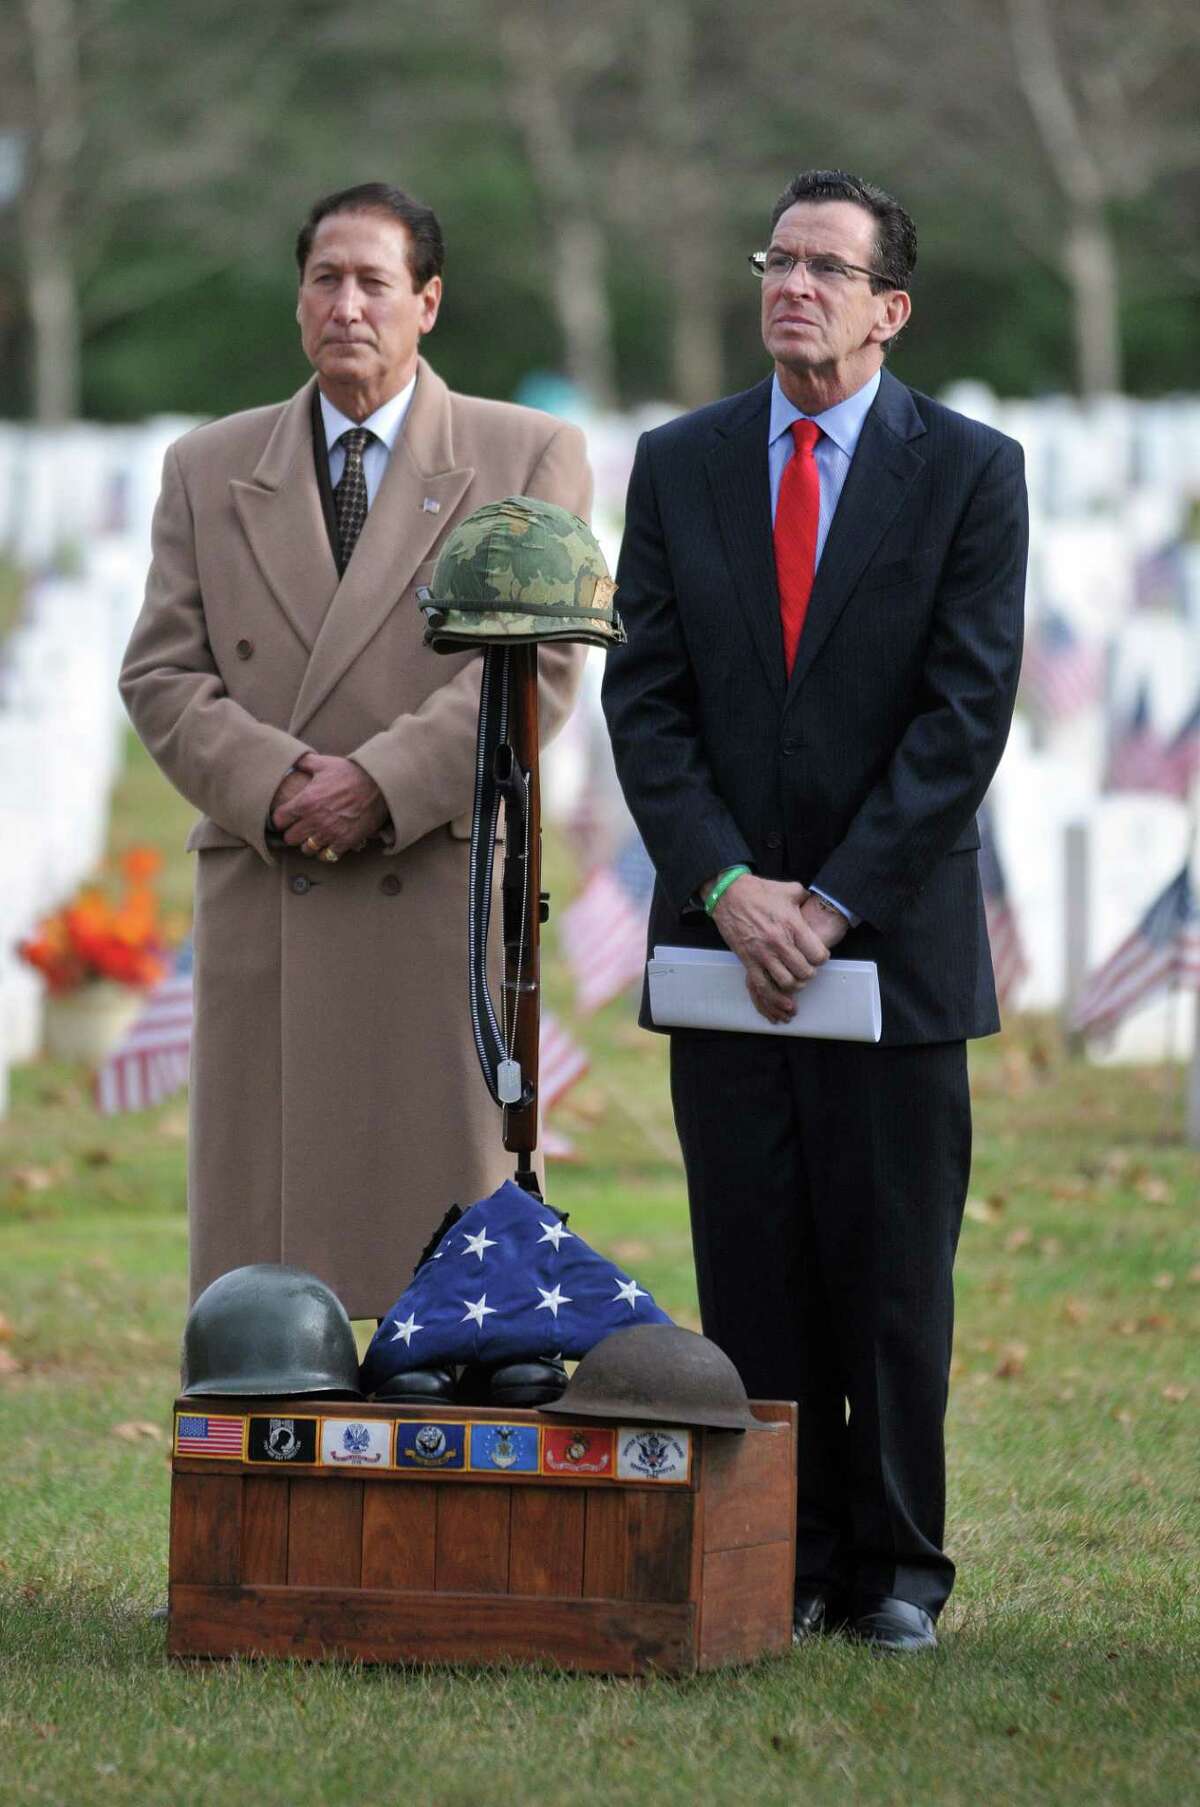 Councilman Tom Serra and Gov. Dannel P. Malloy at the Veterans Day ceremony Monday afternoon at the State of Connecticut Veterans' Cemetery at 317 Bow Lane in Middletown. Catherine Avalone - The Middletown Press